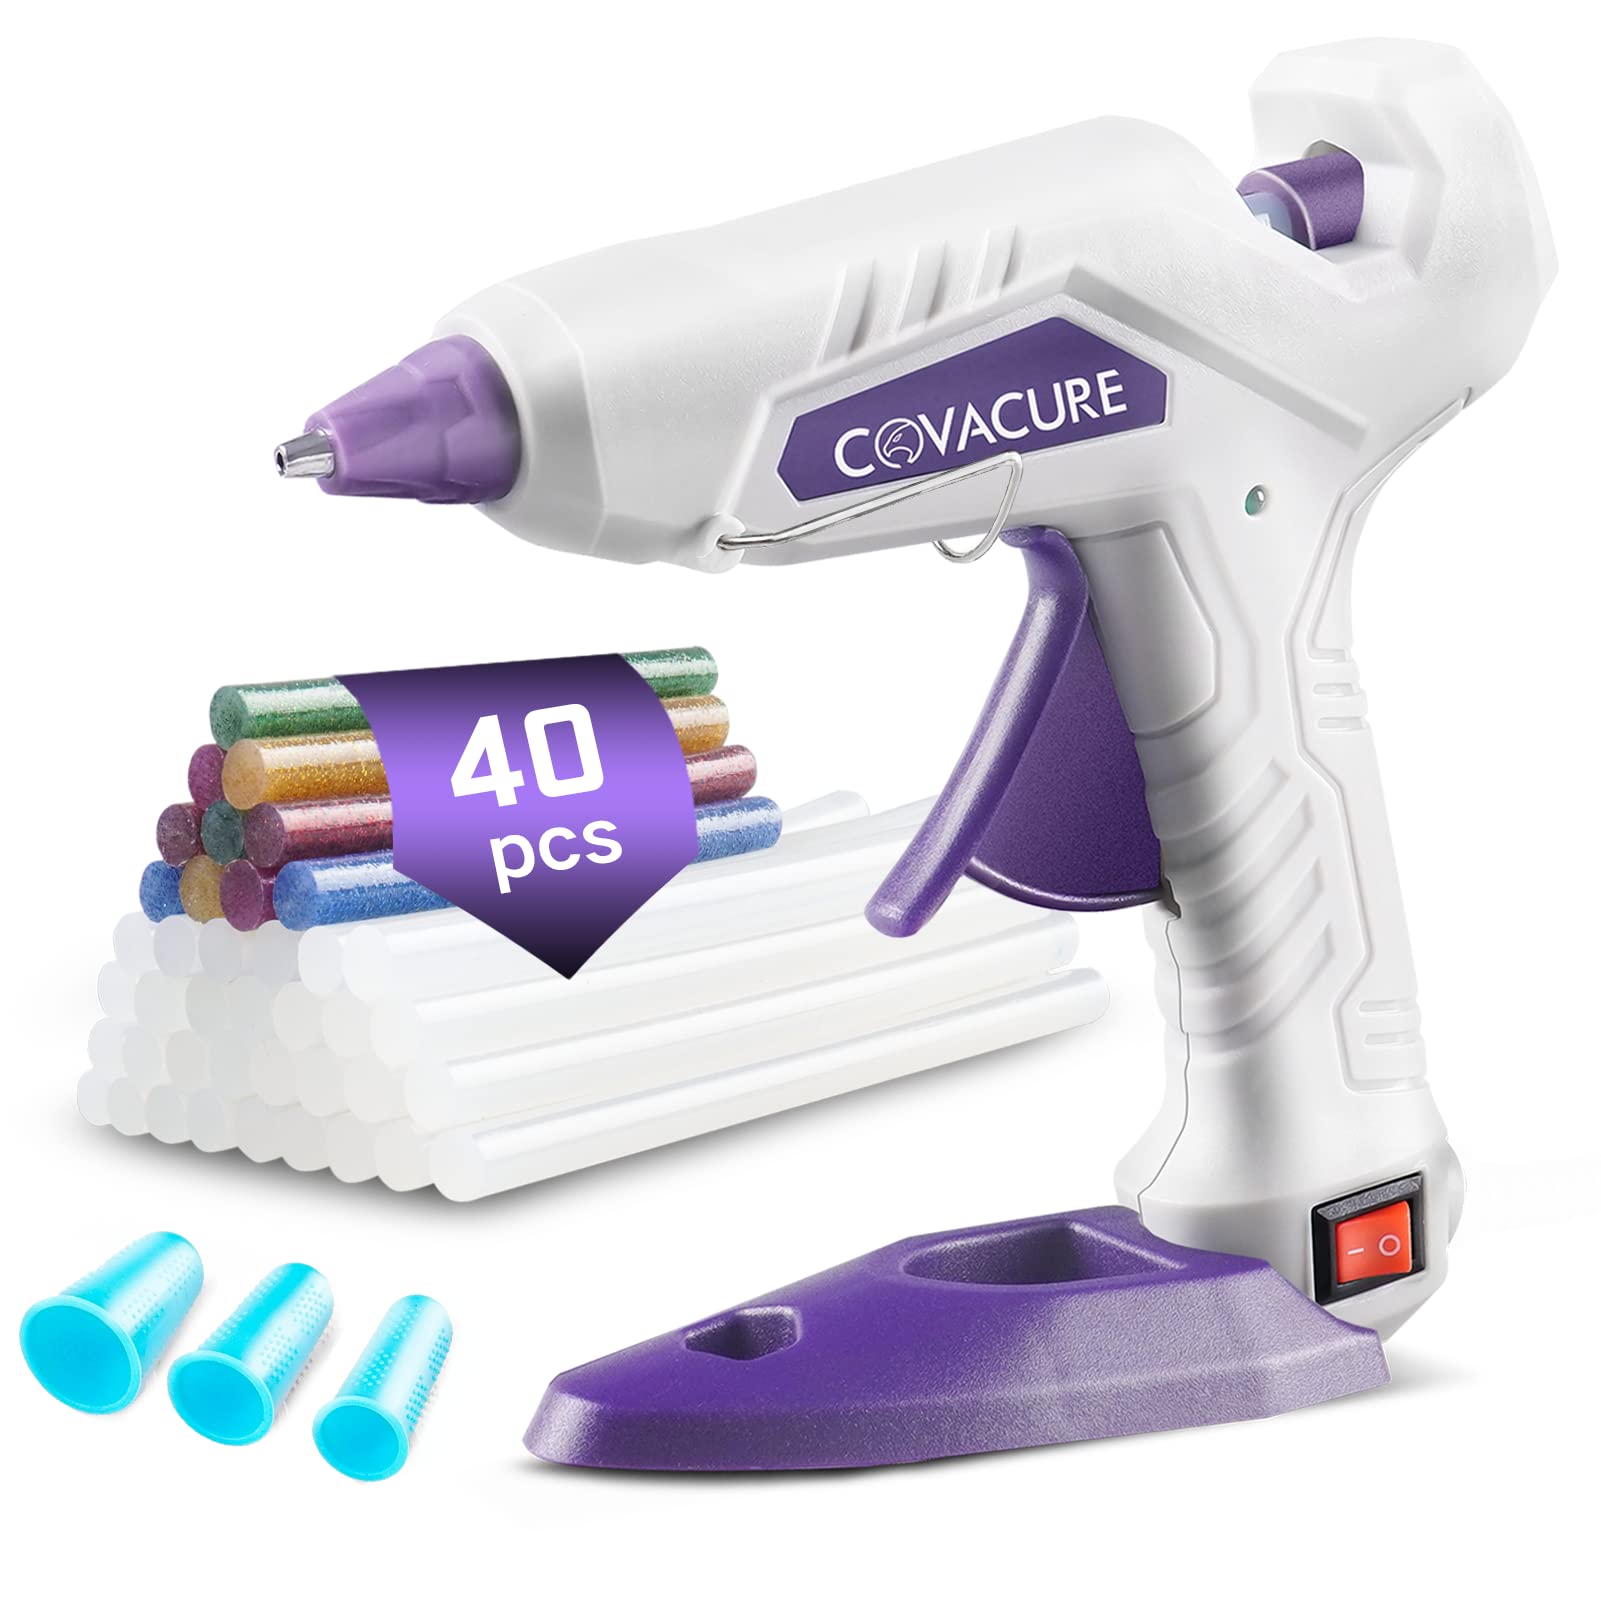 Covacure Hot Glue Gun Kit For Kids with 40 PCS Glue Sticks - Fast Heating &  Drip Proof Glue Gun with 3 Finger protectors & Base Stand, ideal for